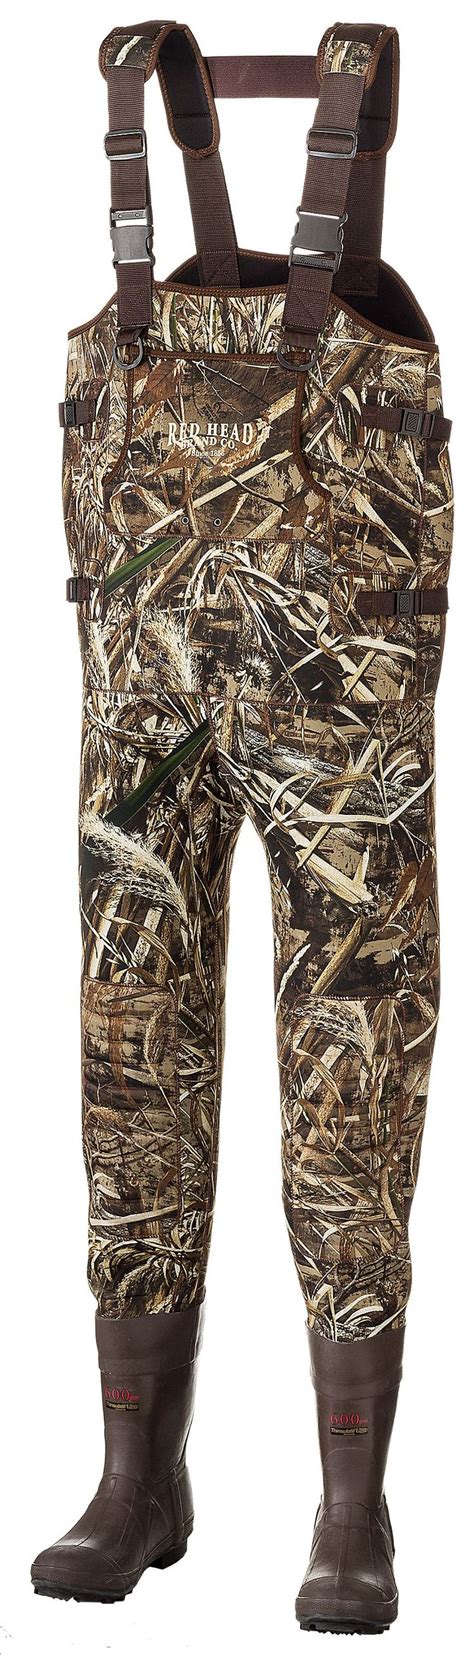 Cabela's Waterproof Breathable Hunting Waders for Men. This product is currently not available online. 3.1. (70) Write a review. No media assets available for preview. Clear Selections. Size Guide. Add to Wish List. .